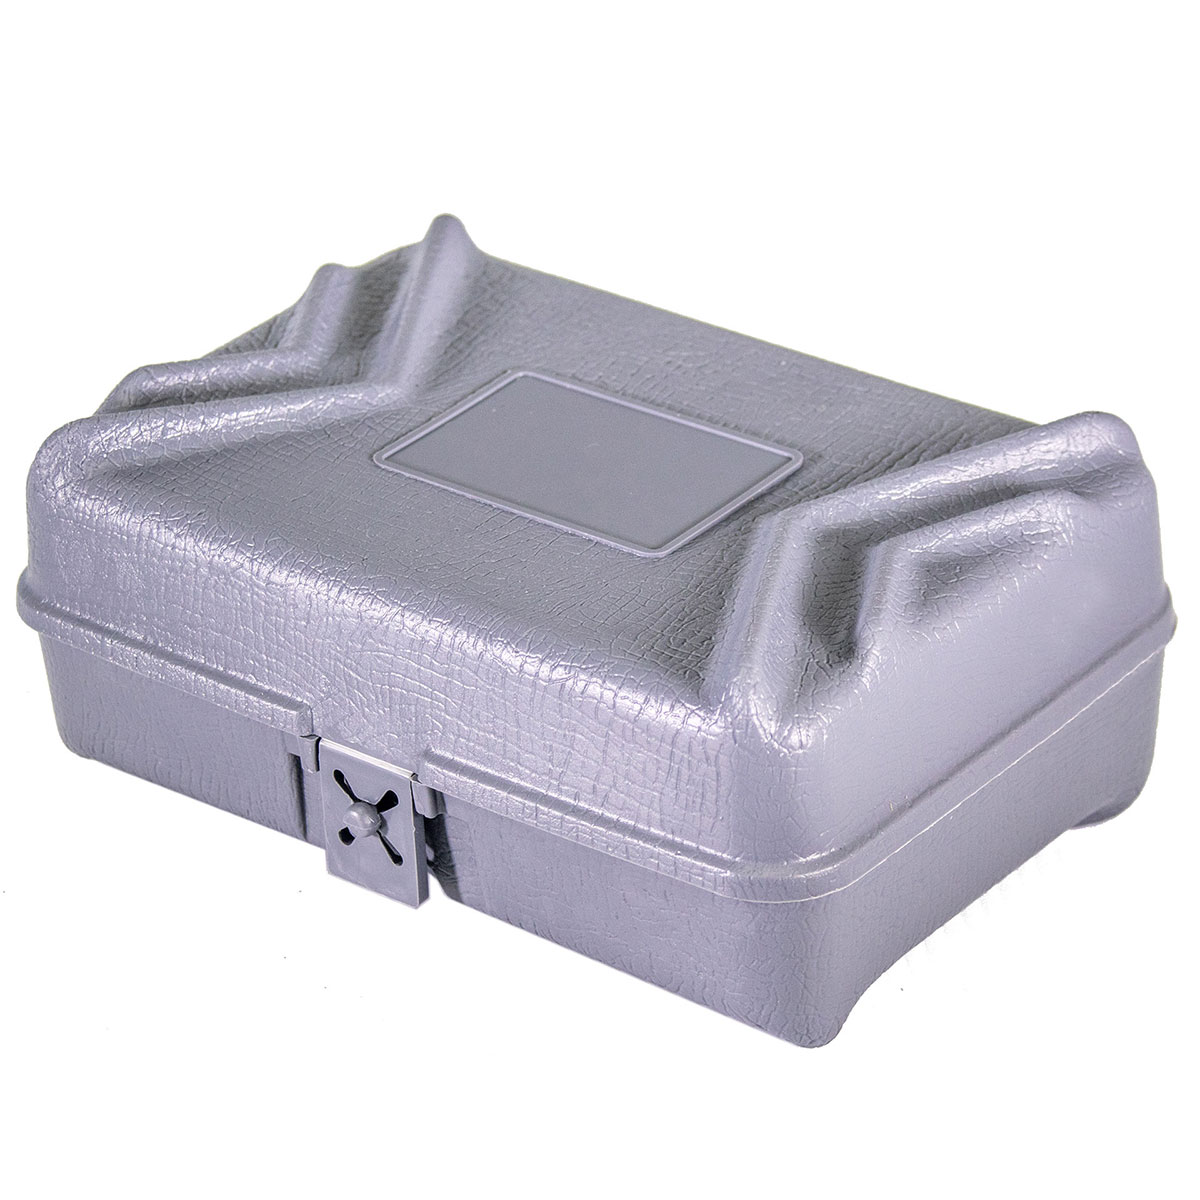 Maddox Metal Container with Cap, 5L - MAD-10004/5 - Pro Detailing